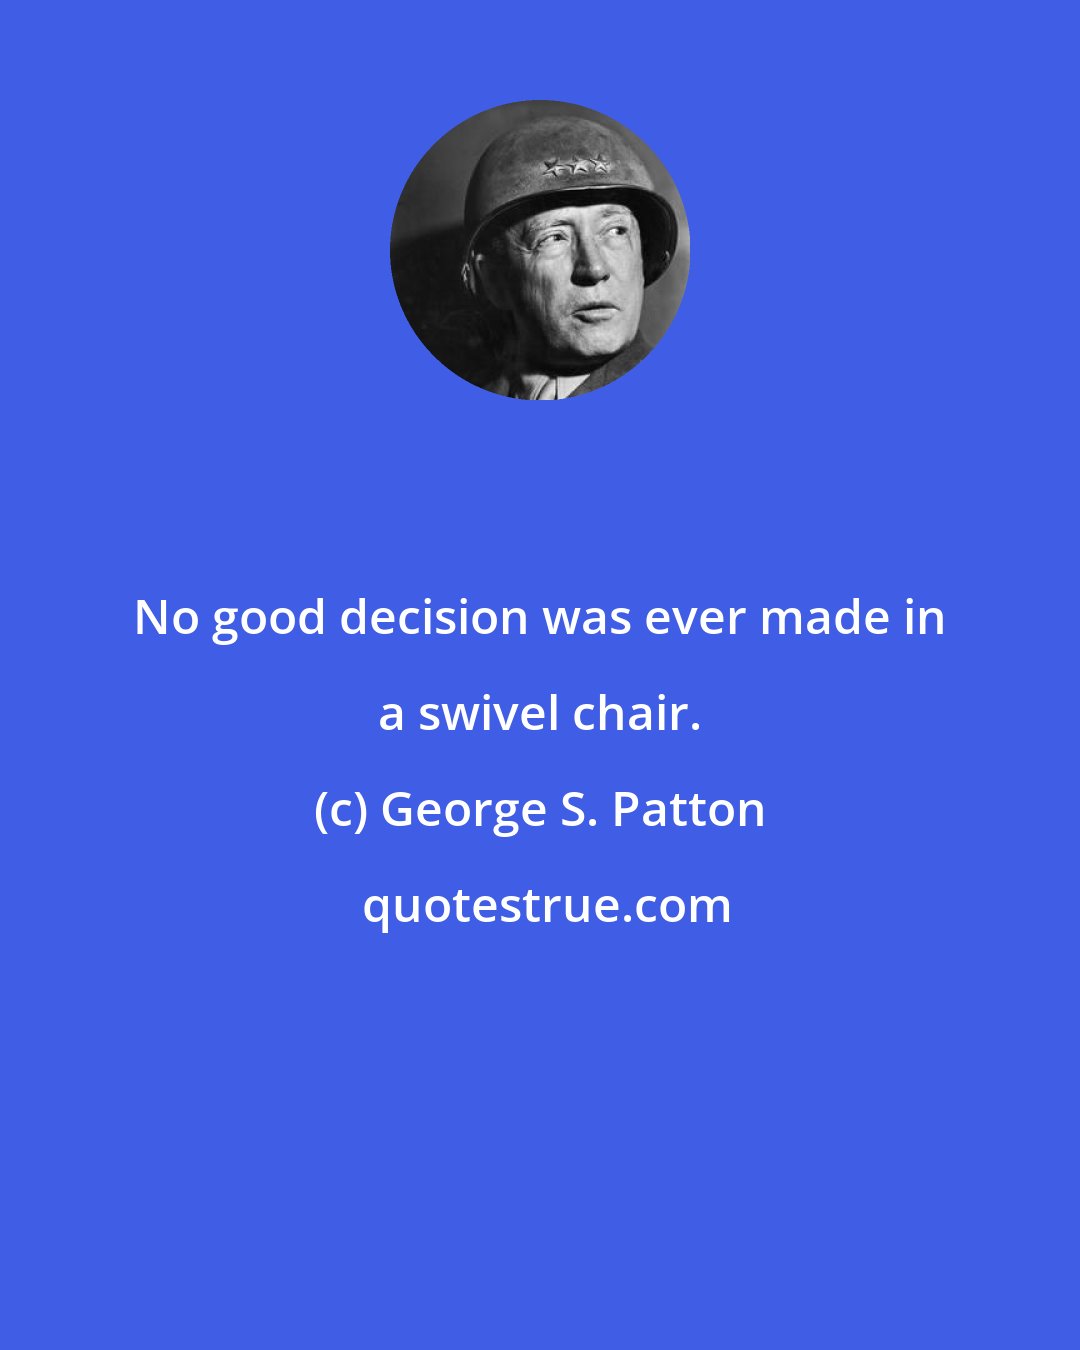 George S. Patton: No good decision was ever made in a swivel chair.